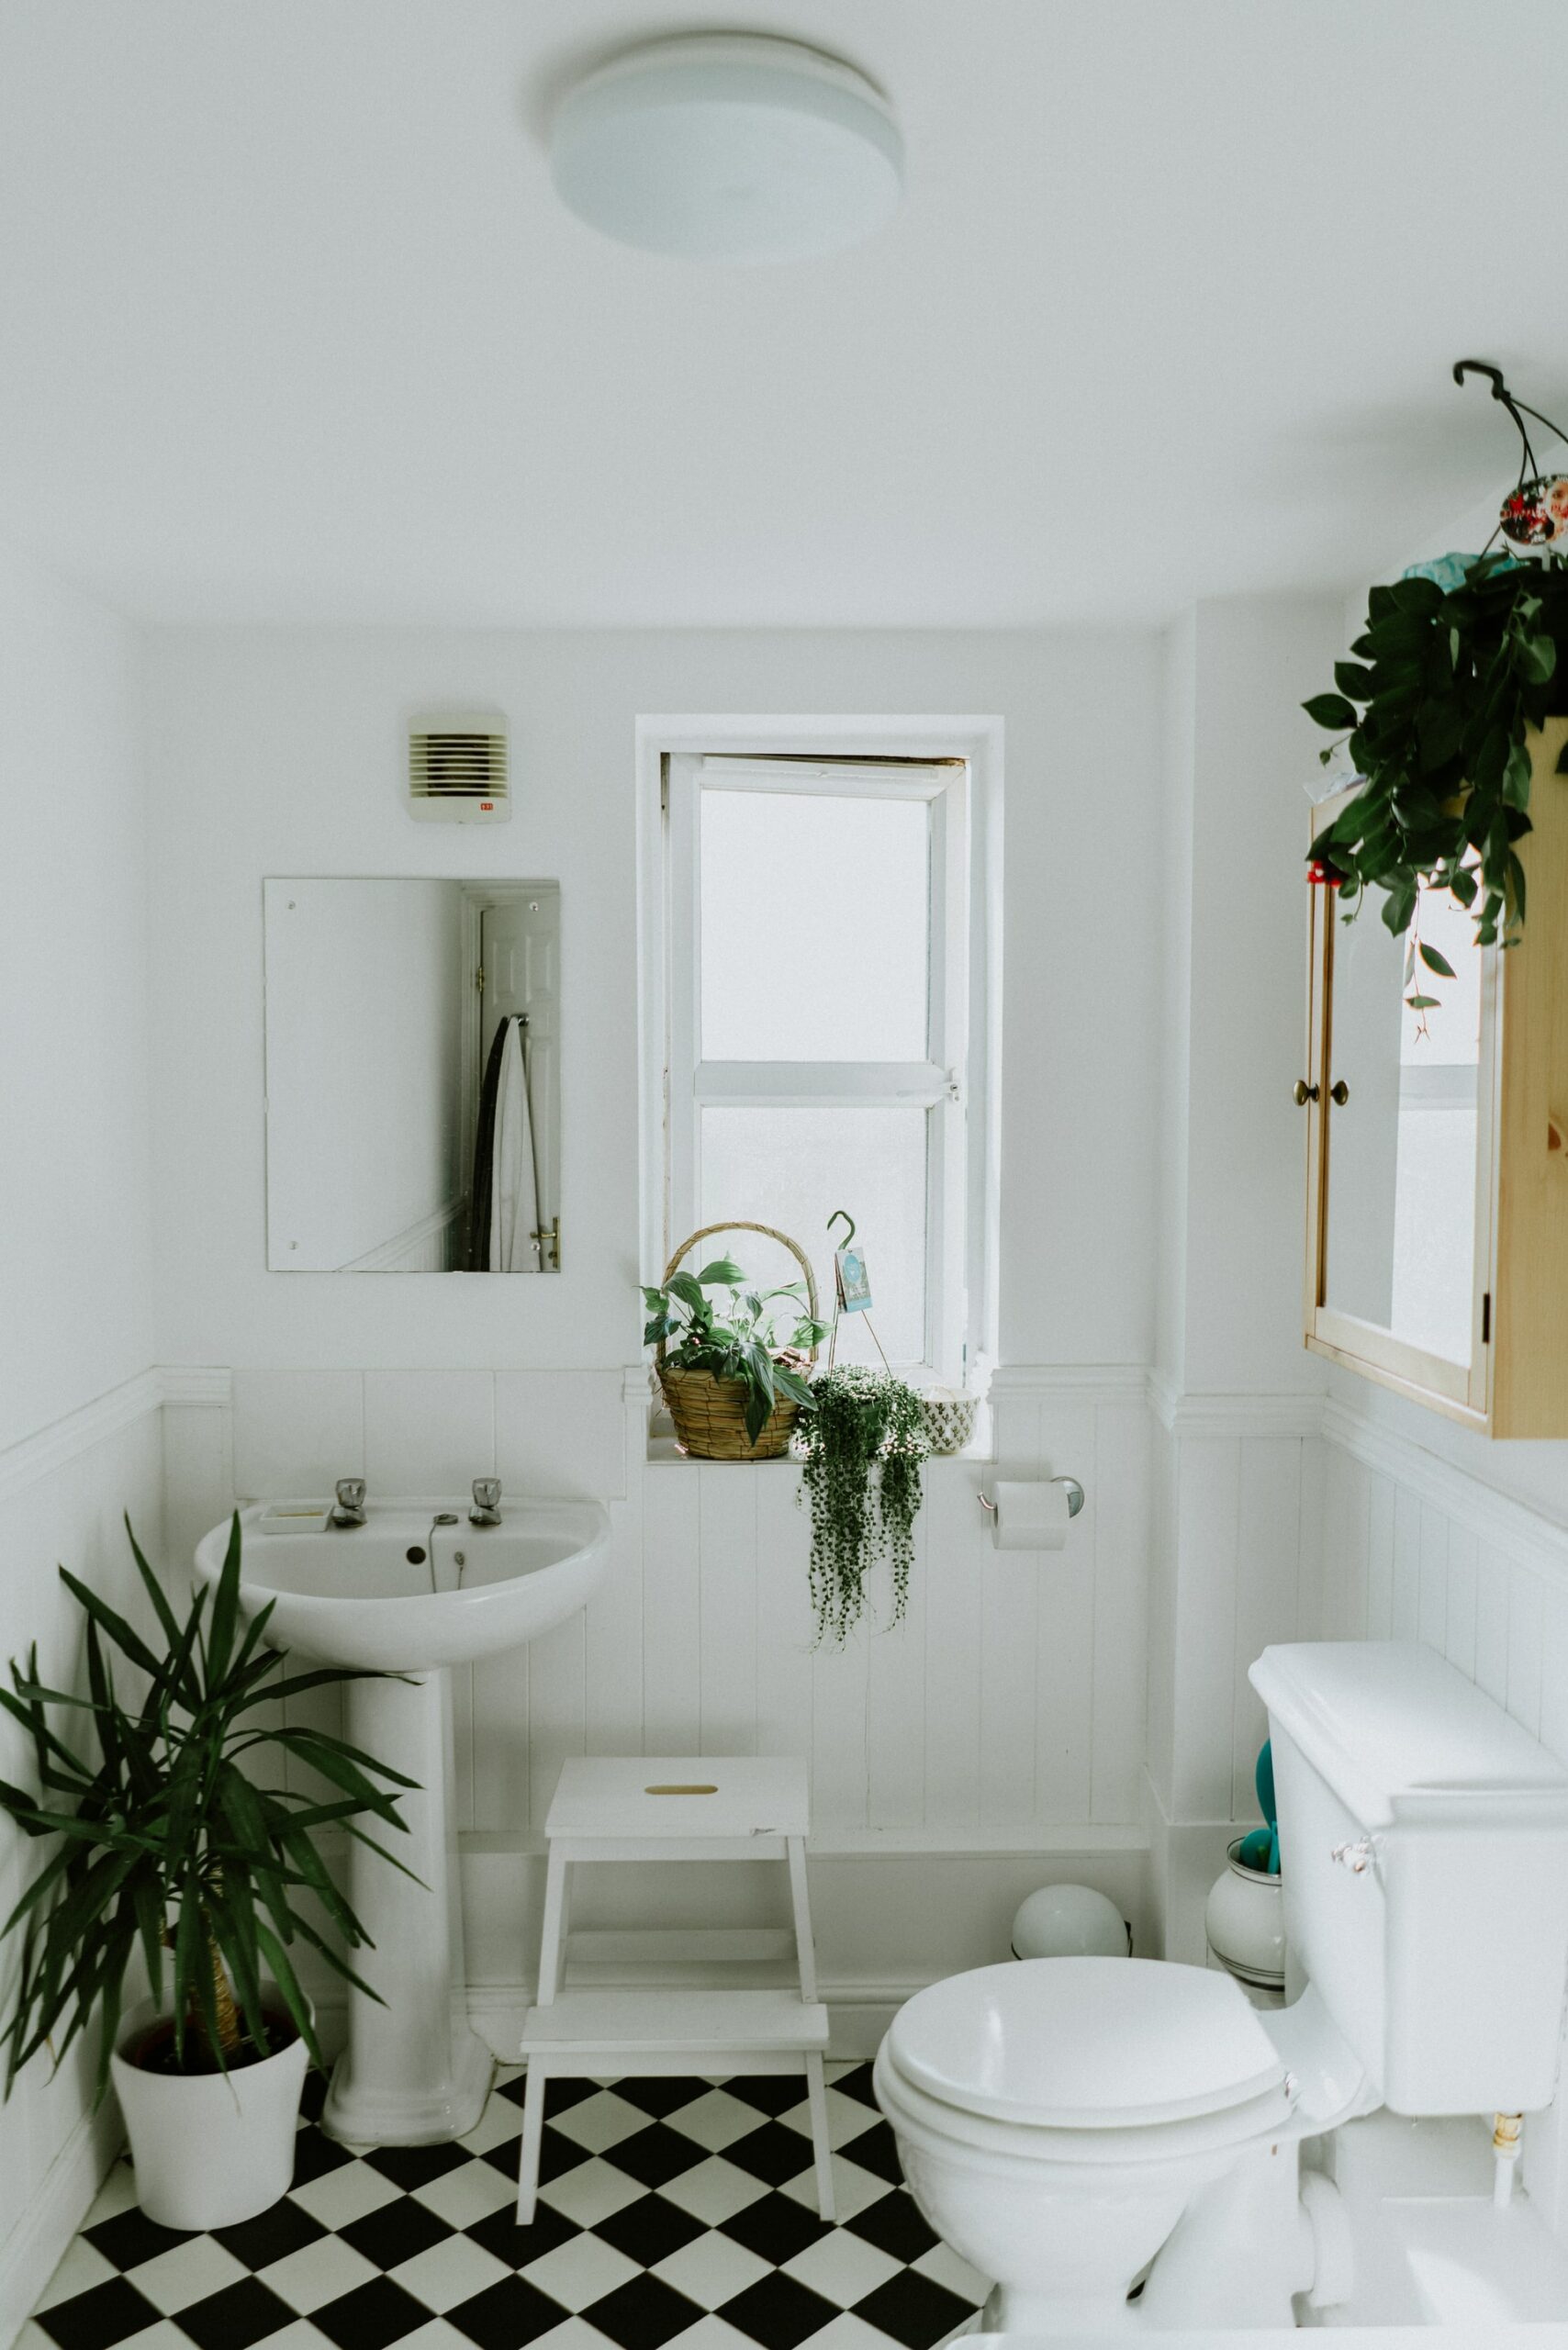 5 Tips For Decorating A Small Bathroom